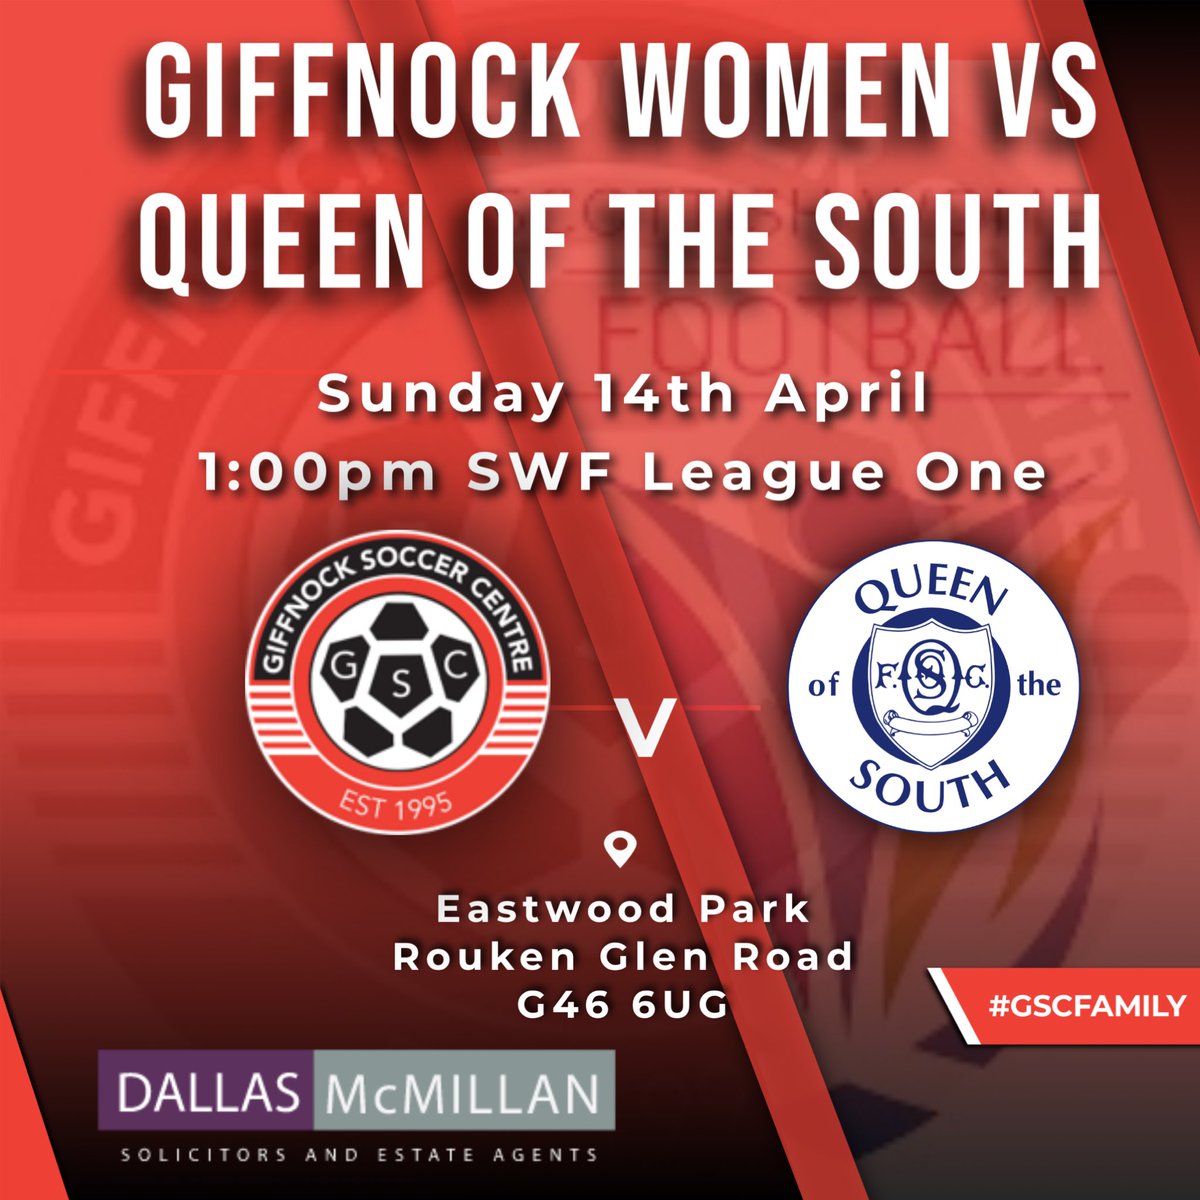 Join us this Sunday as the girls look to make it 3 wins in a row in our final home game of the season! 🆚@QoSLadies_Girls 🏆SWF League One ⌚️1:00pm 🏟️Eastwood Park